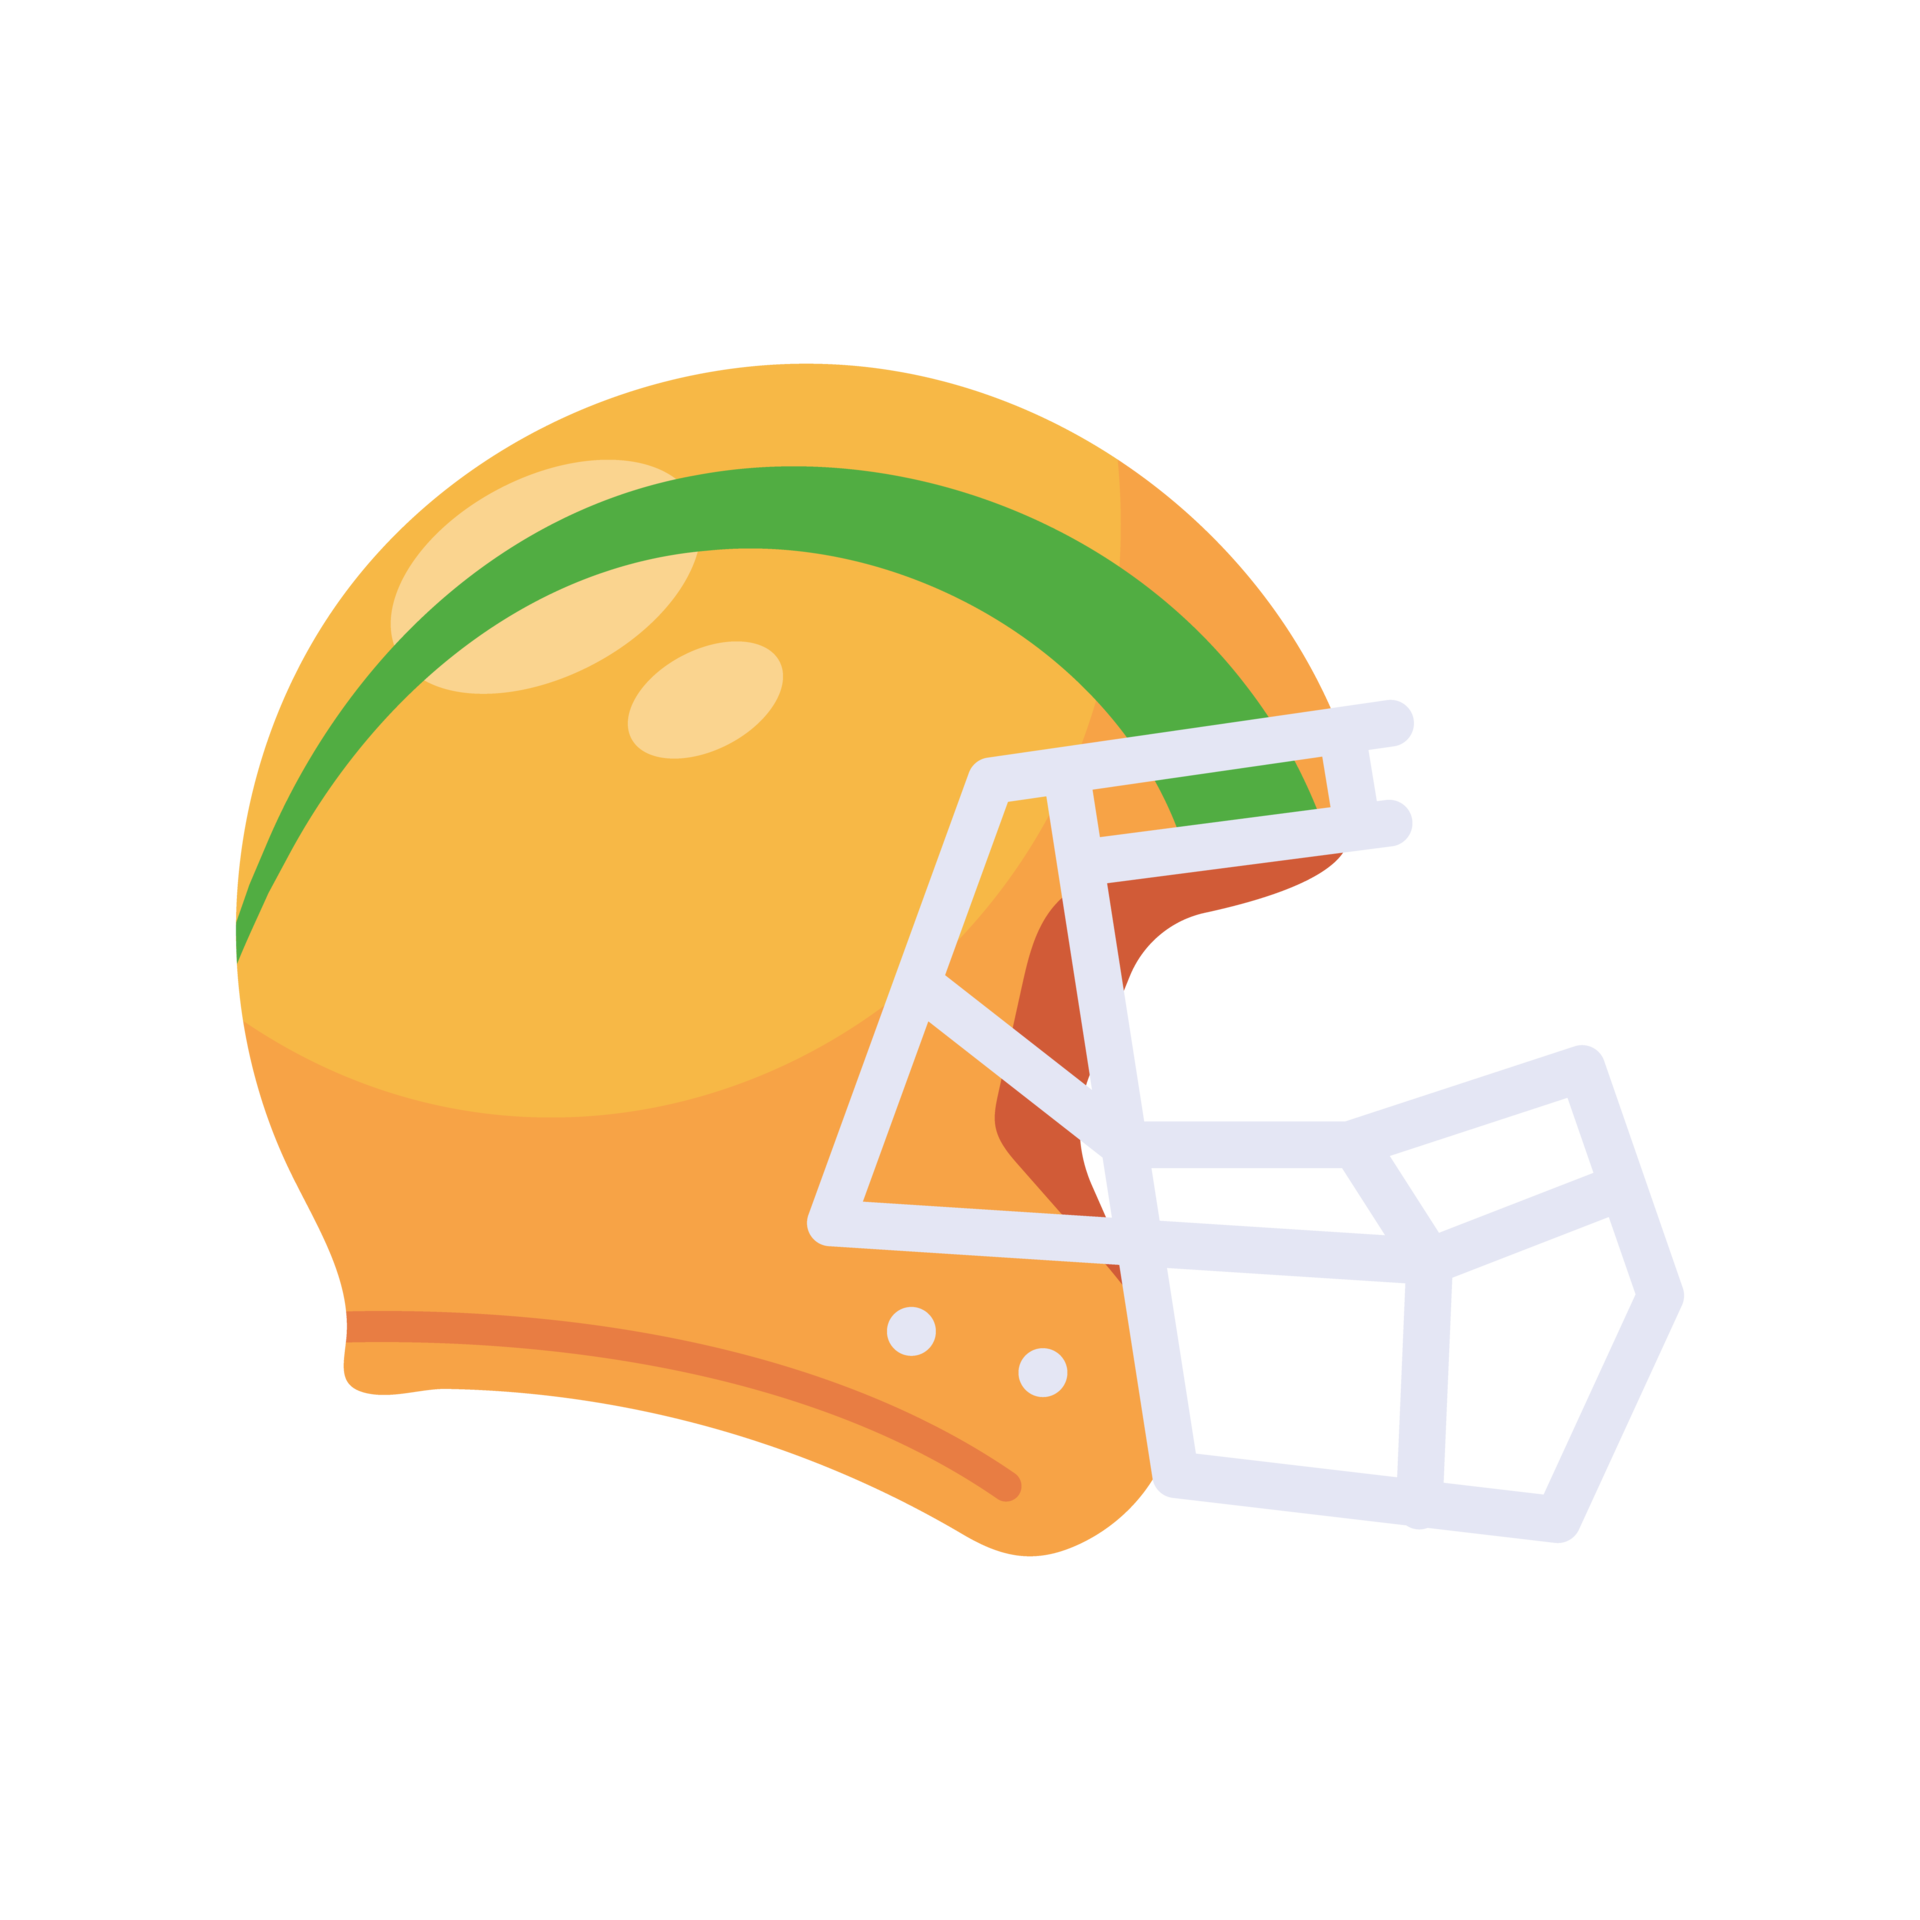 https://static.vecteezy.com/system/resources/previews/014/616/165/original/a-rugby-helmet-to-protect-american-football-players-png.png